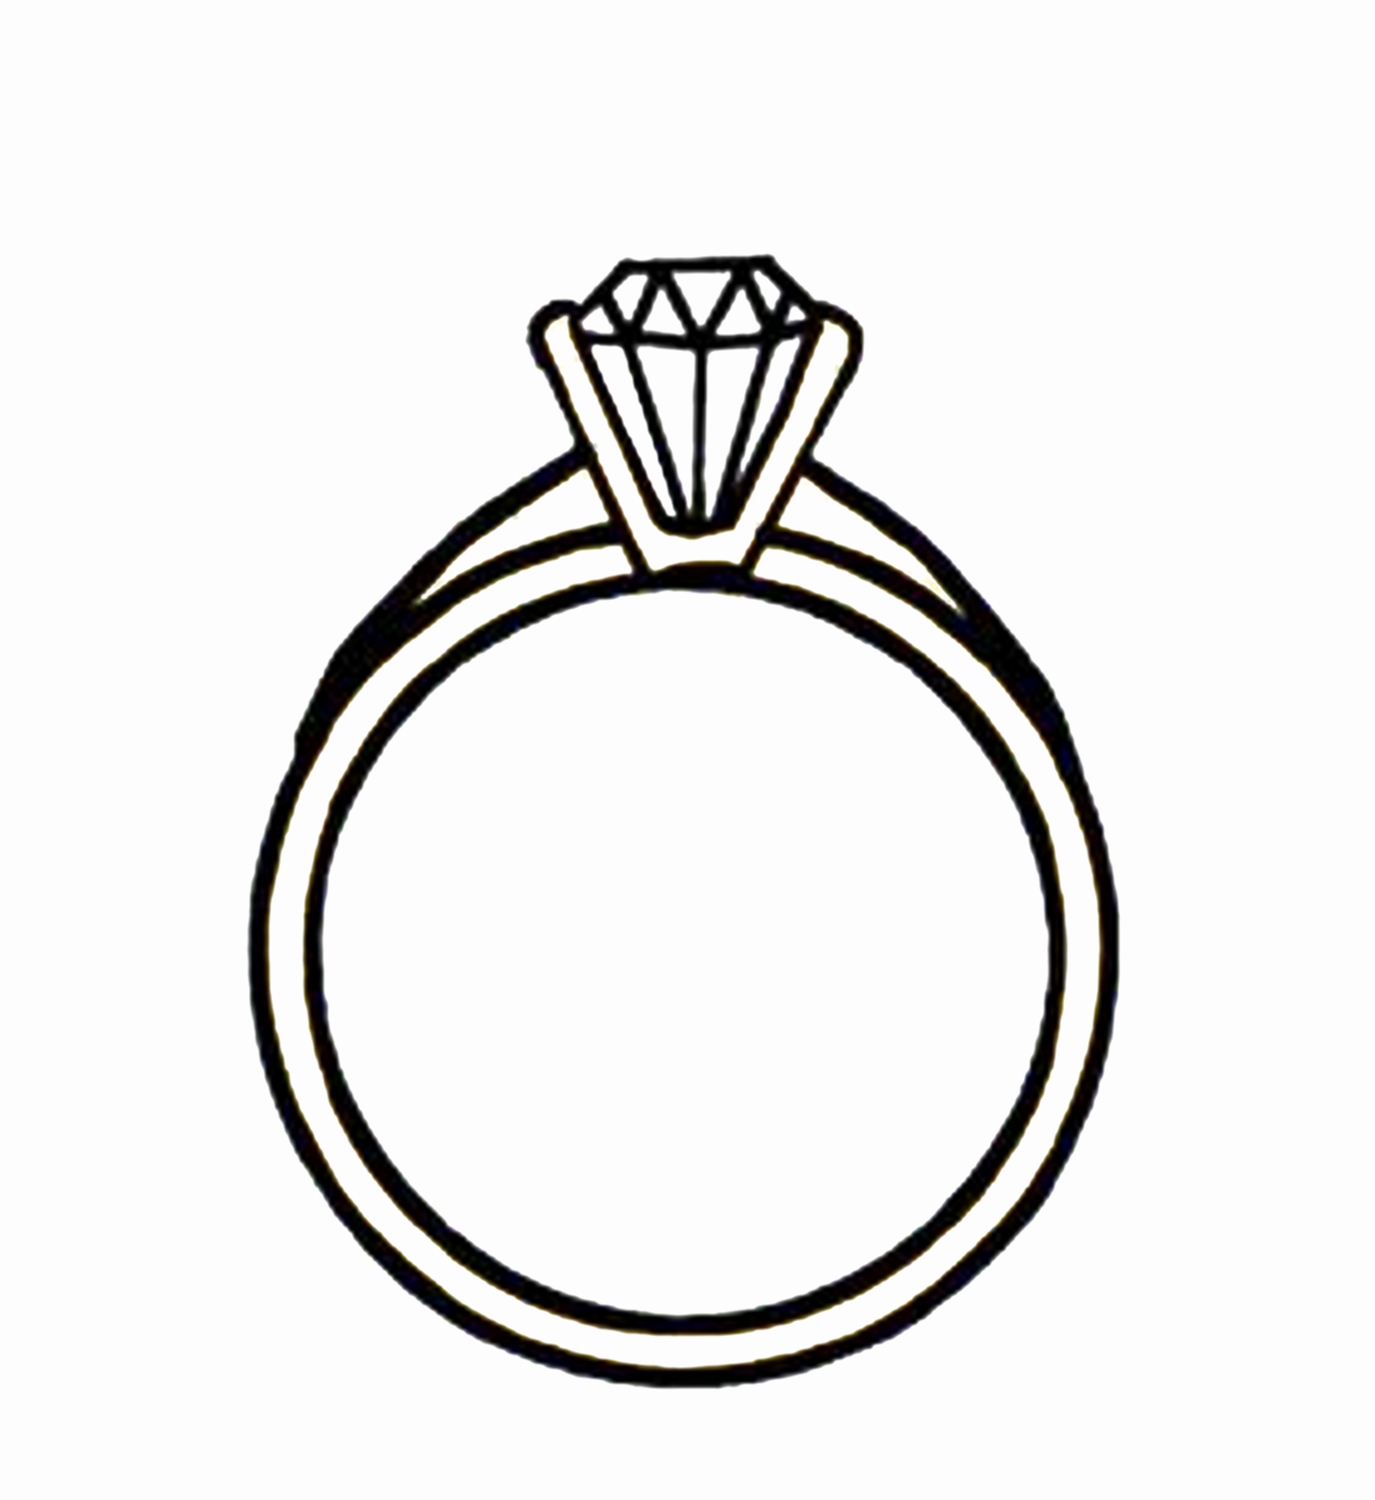 Irish Claddagh Drawing Free download on ClipArtMag